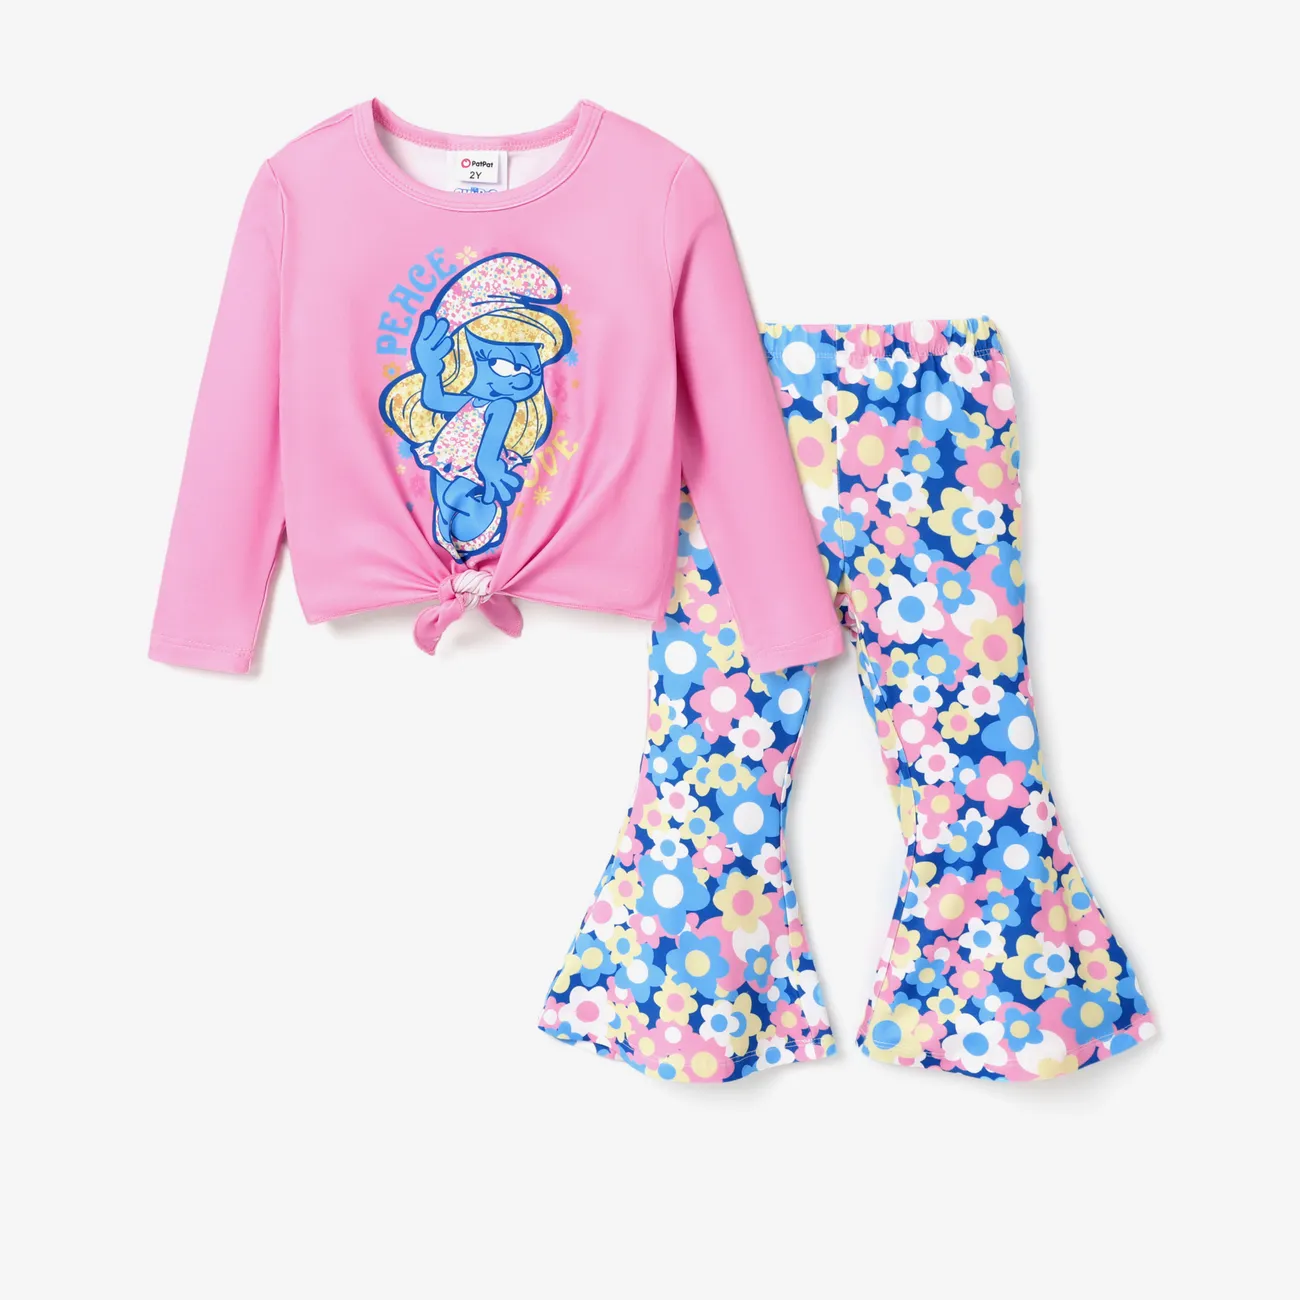 Smurfs Toddler Girl Knotted Top and Printed Flared Pants Pink big image 1